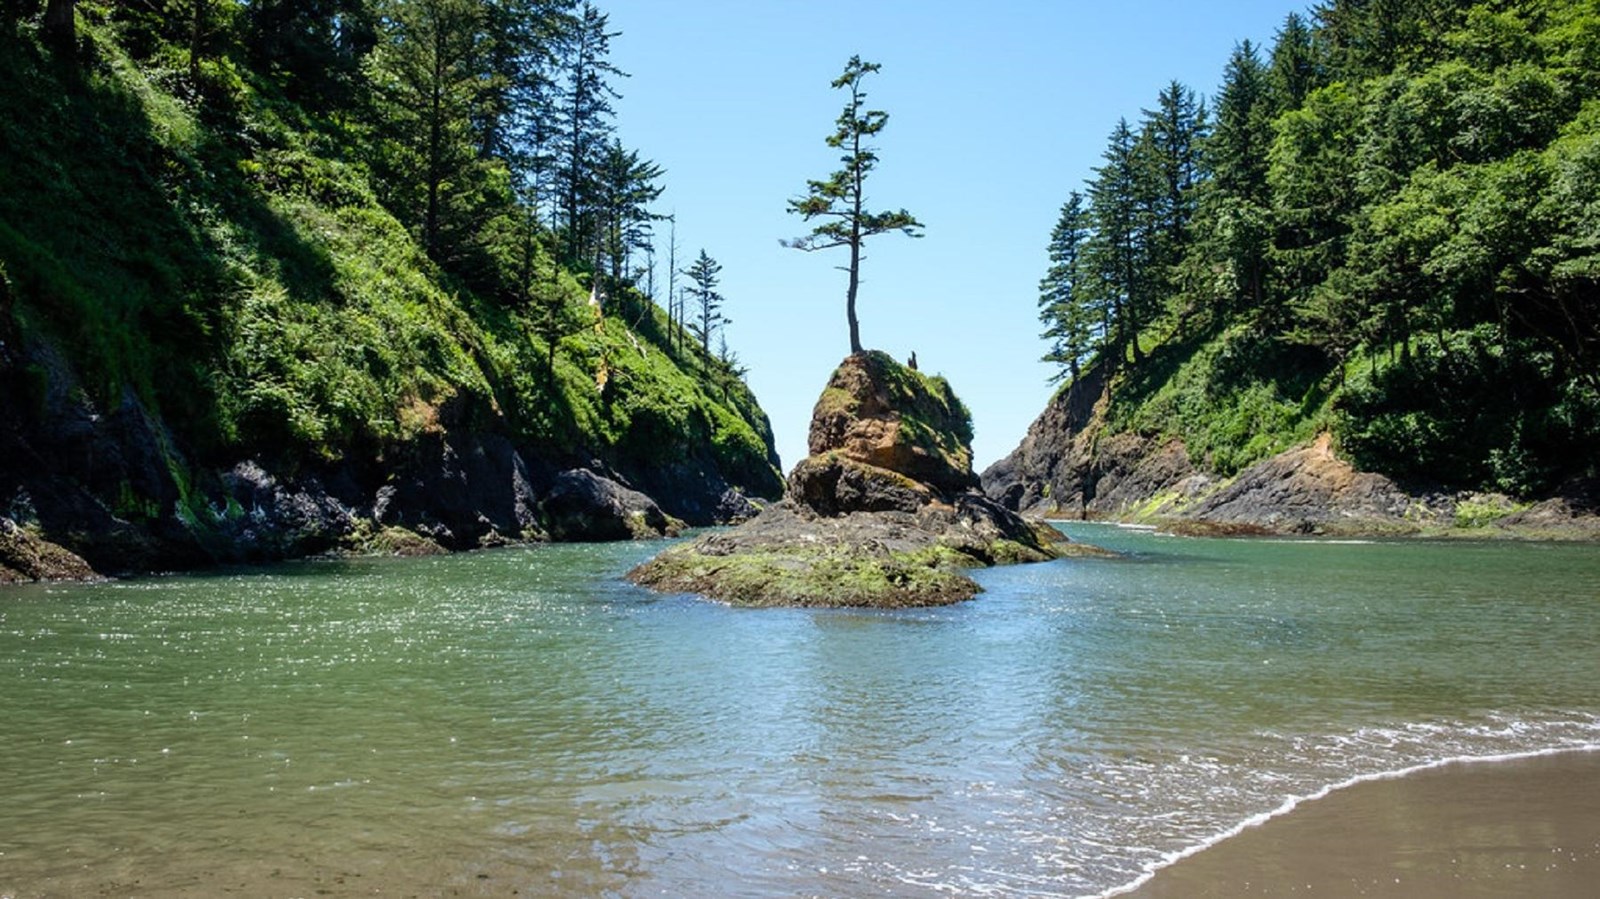 A small island topped with a tree sits in the middle of a tree-lined river.